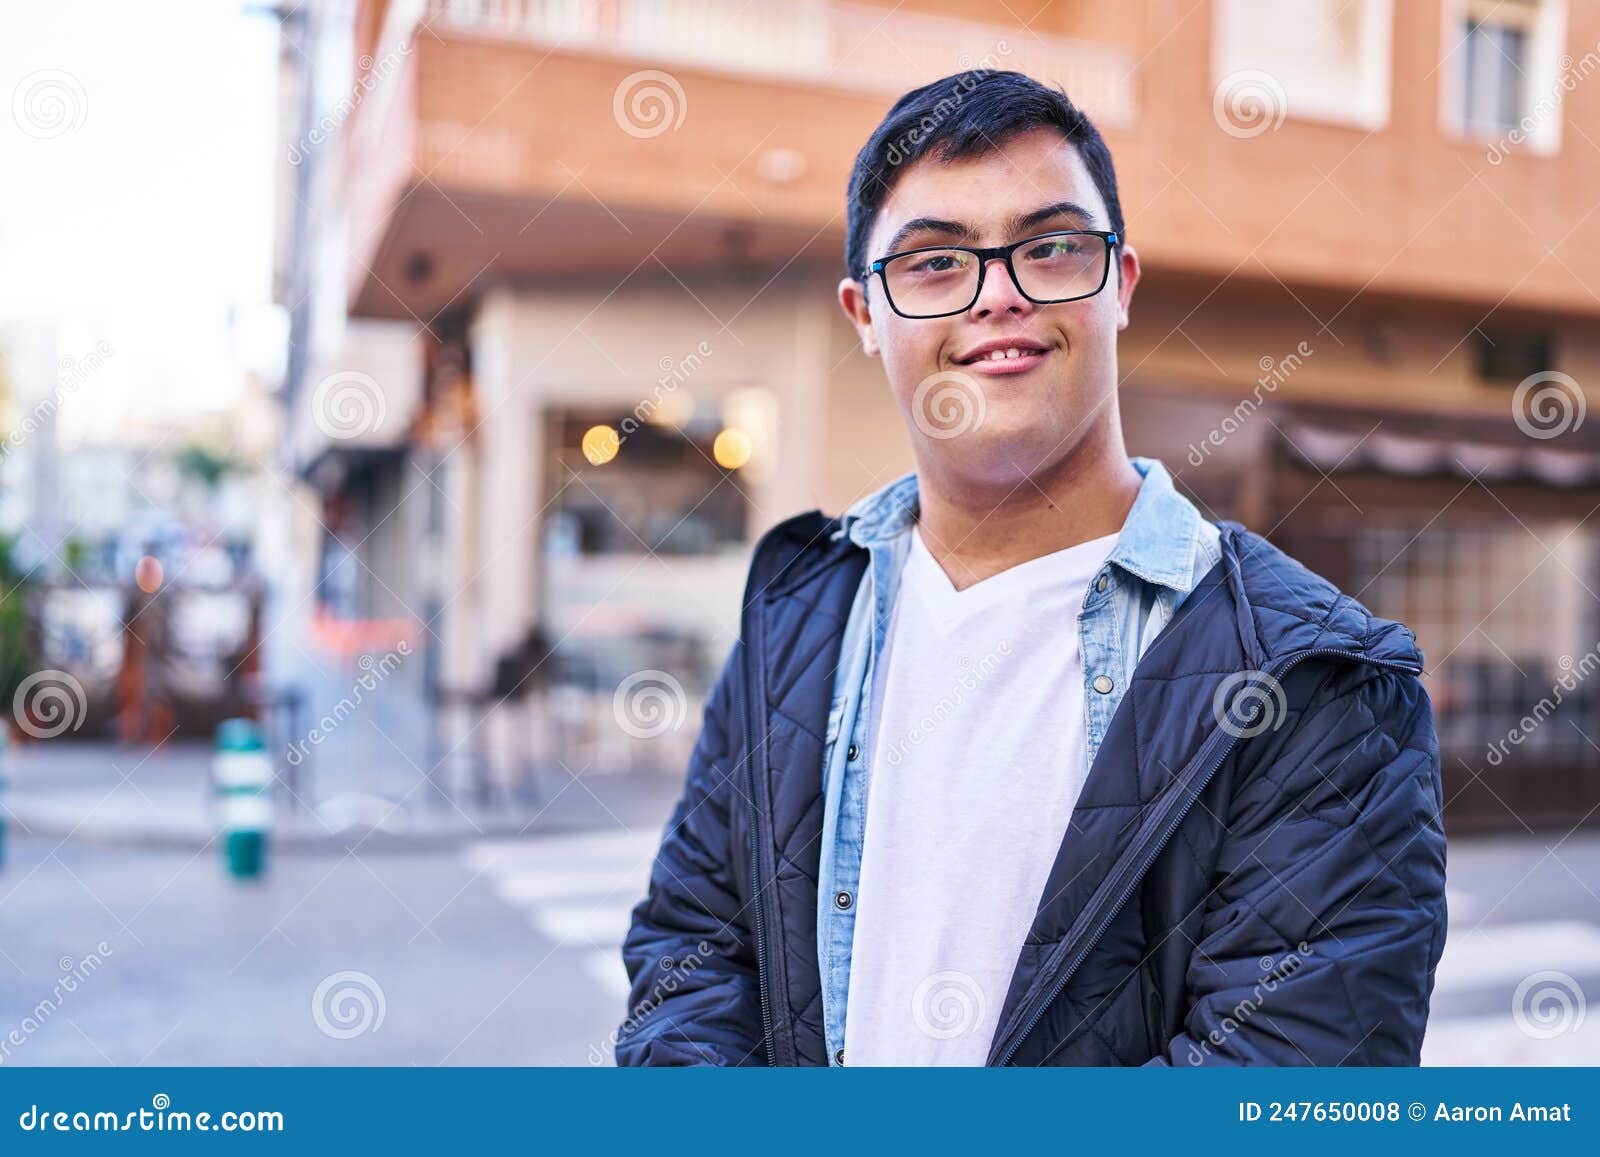 Down Syndrome Man Smiling Confident Standing at Street Stock Photo ...